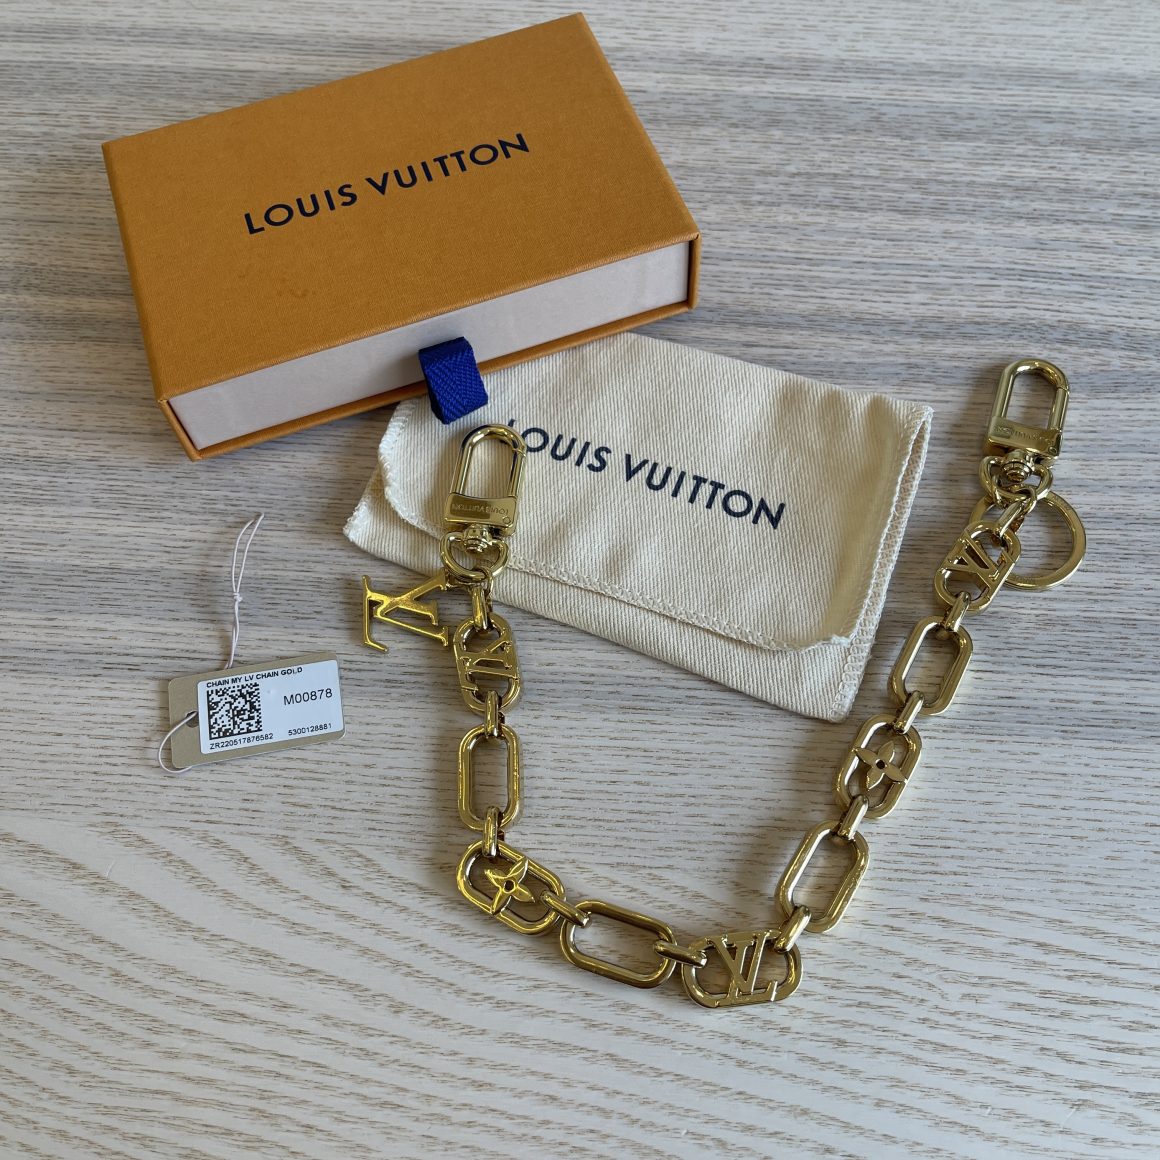 Twist bag charm Louis Vuitton Gold in Gold plated - 36811079